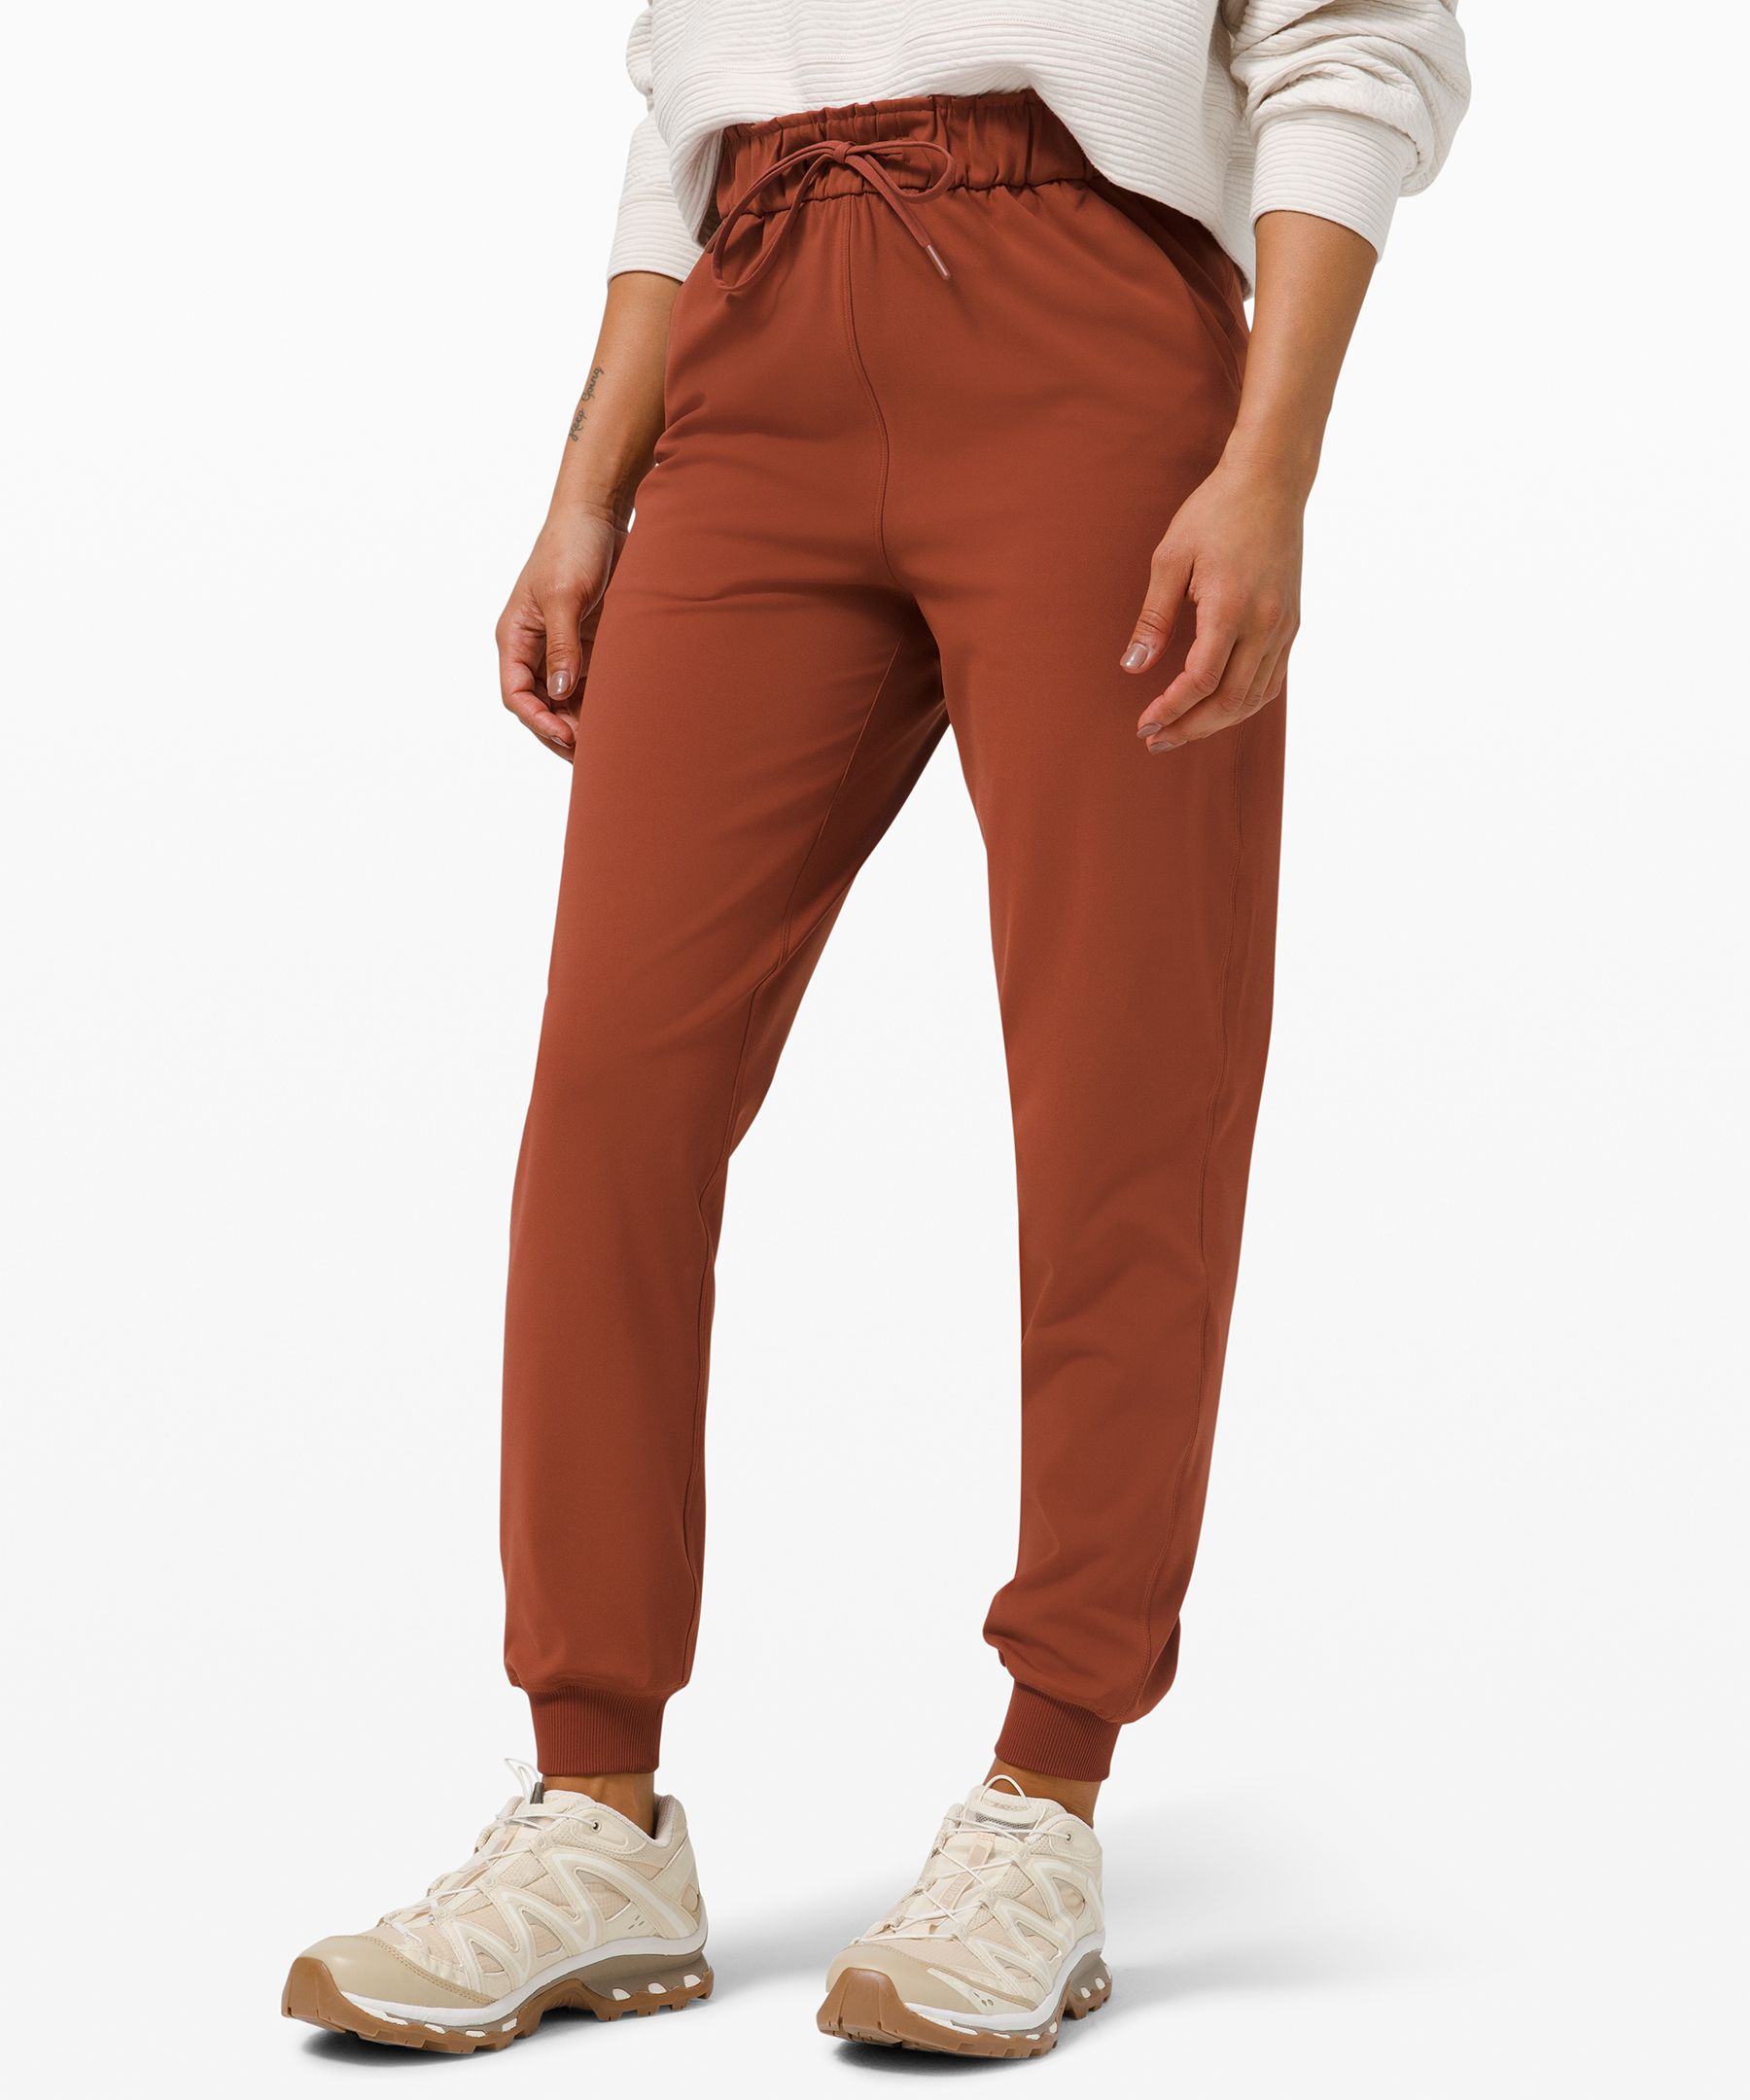 Lululemon Stretch High-rise Joggers Full Length In Ancient Copper